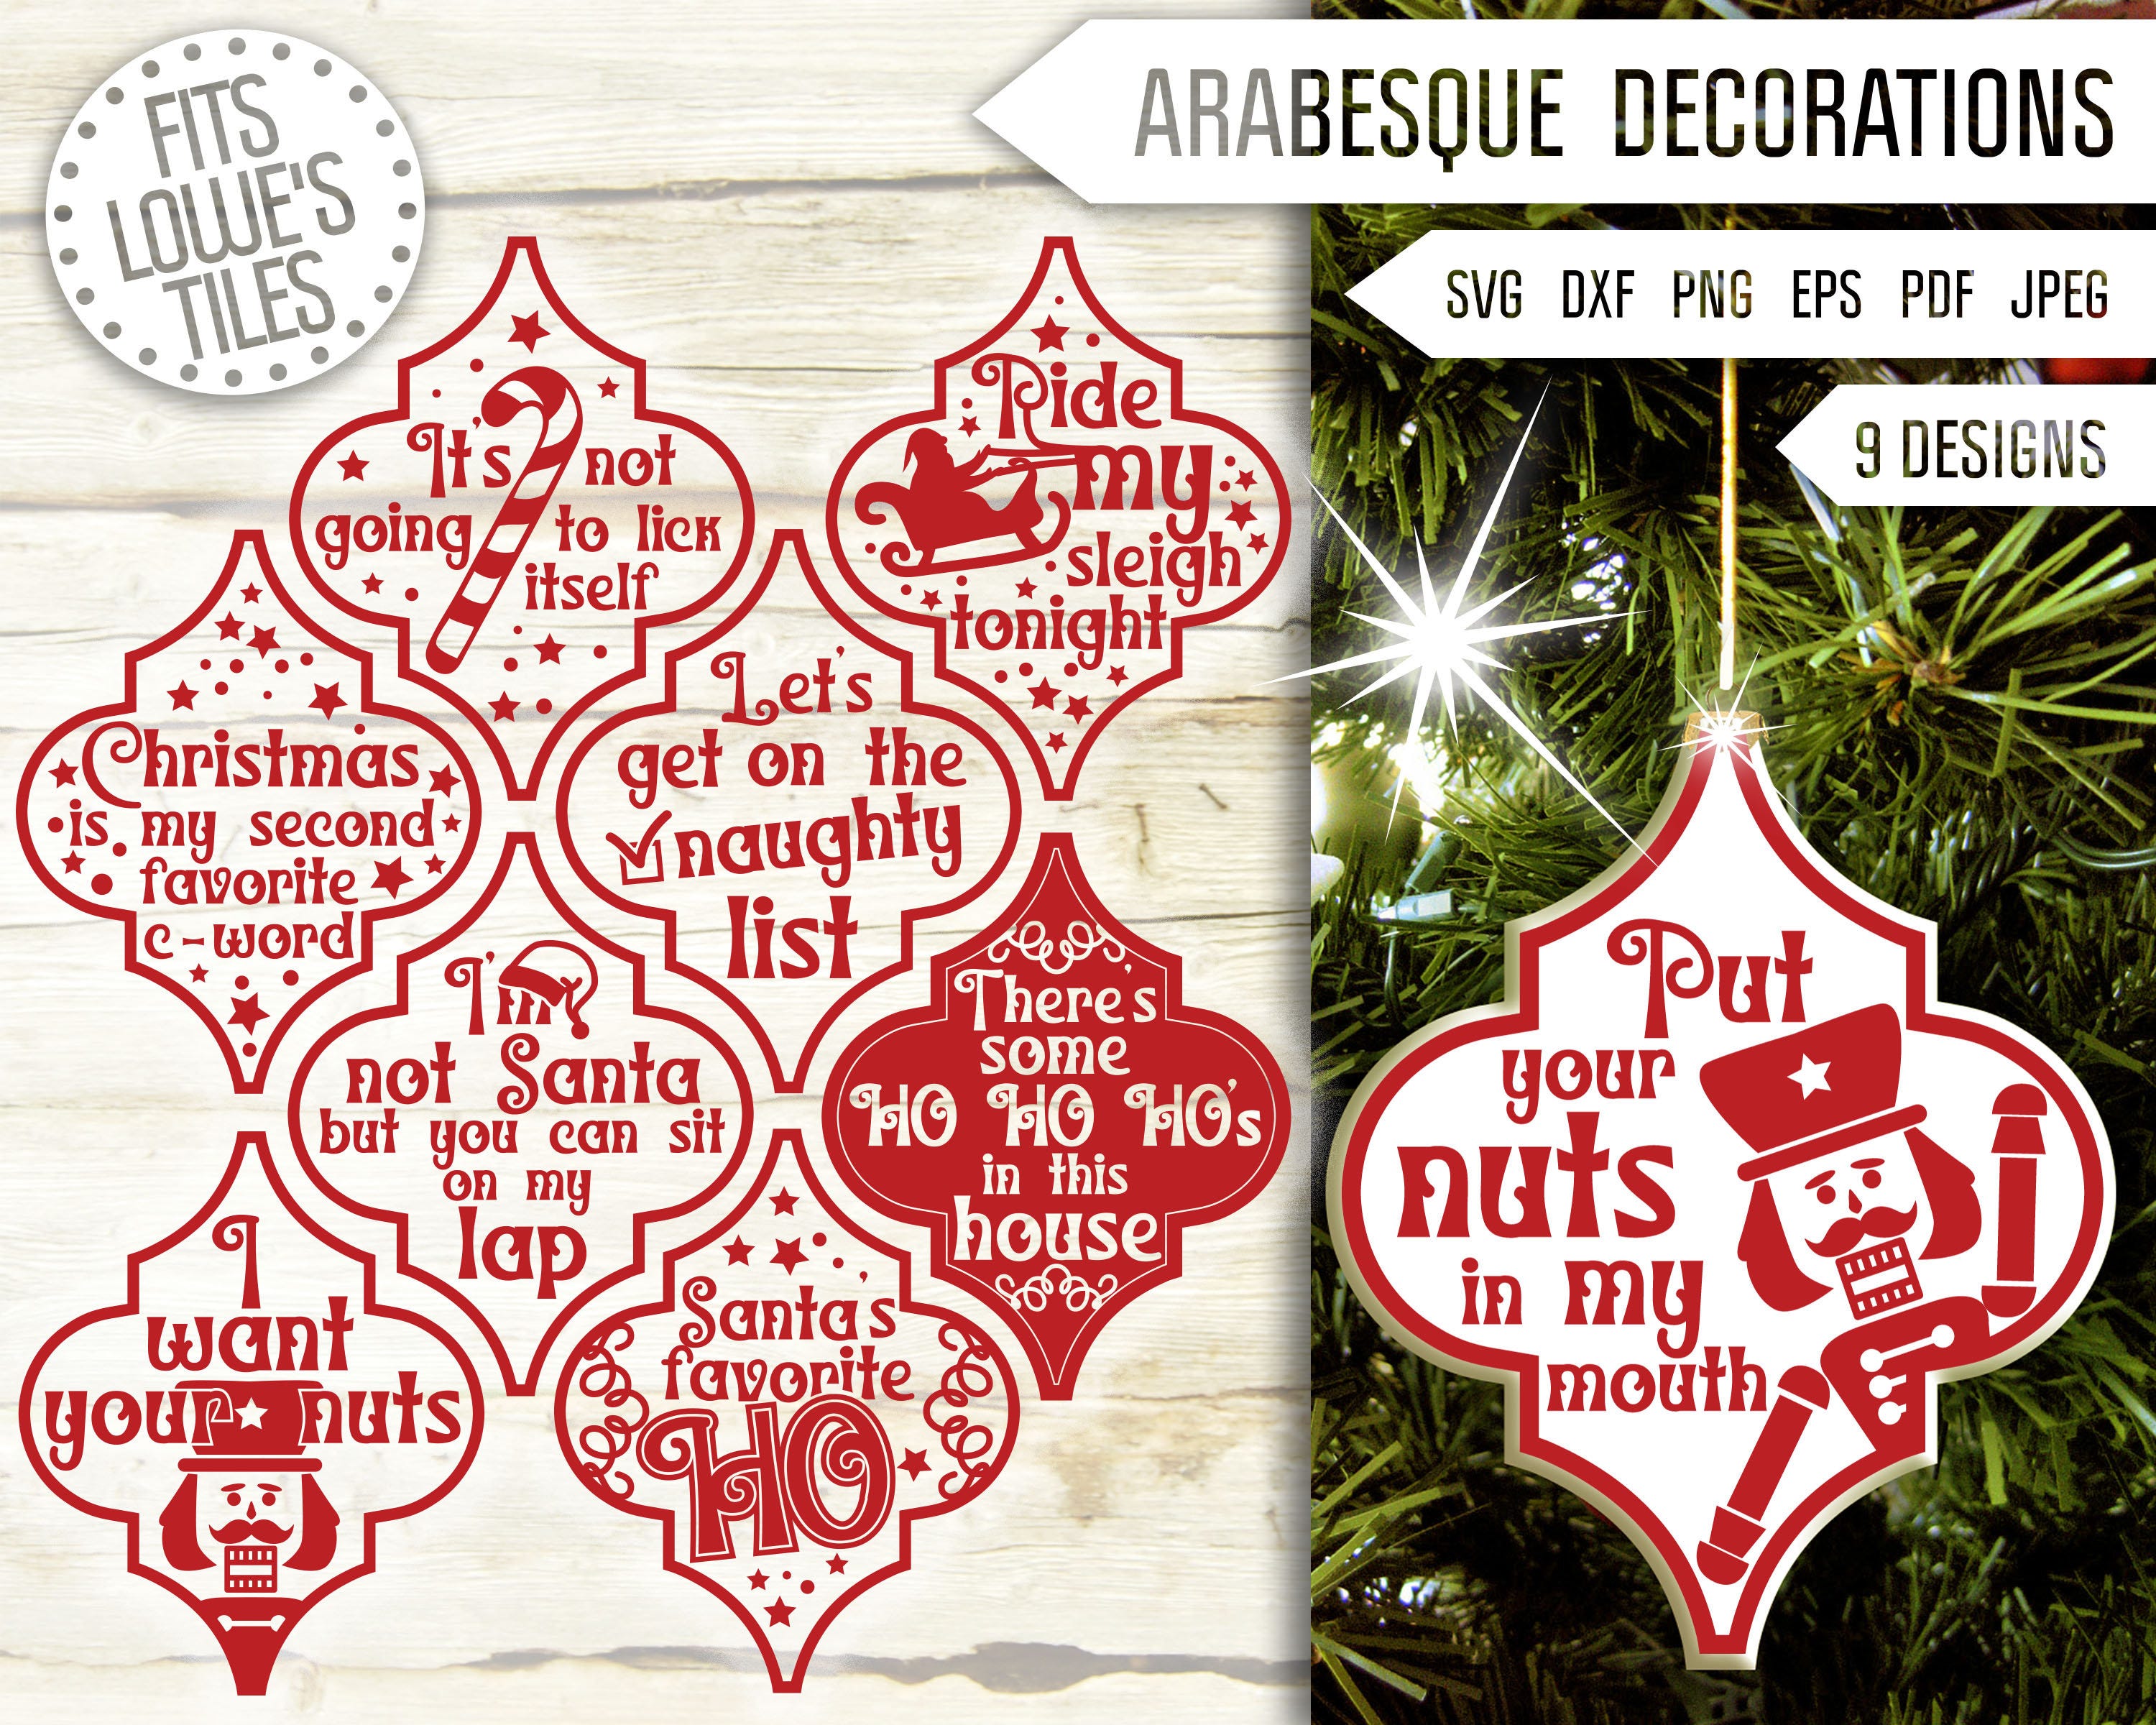 Naughty, Rude and Sexy Arabesque Tile Ornament Svg Bundle. Christmas Arabesque Decorations Svg. Lowe